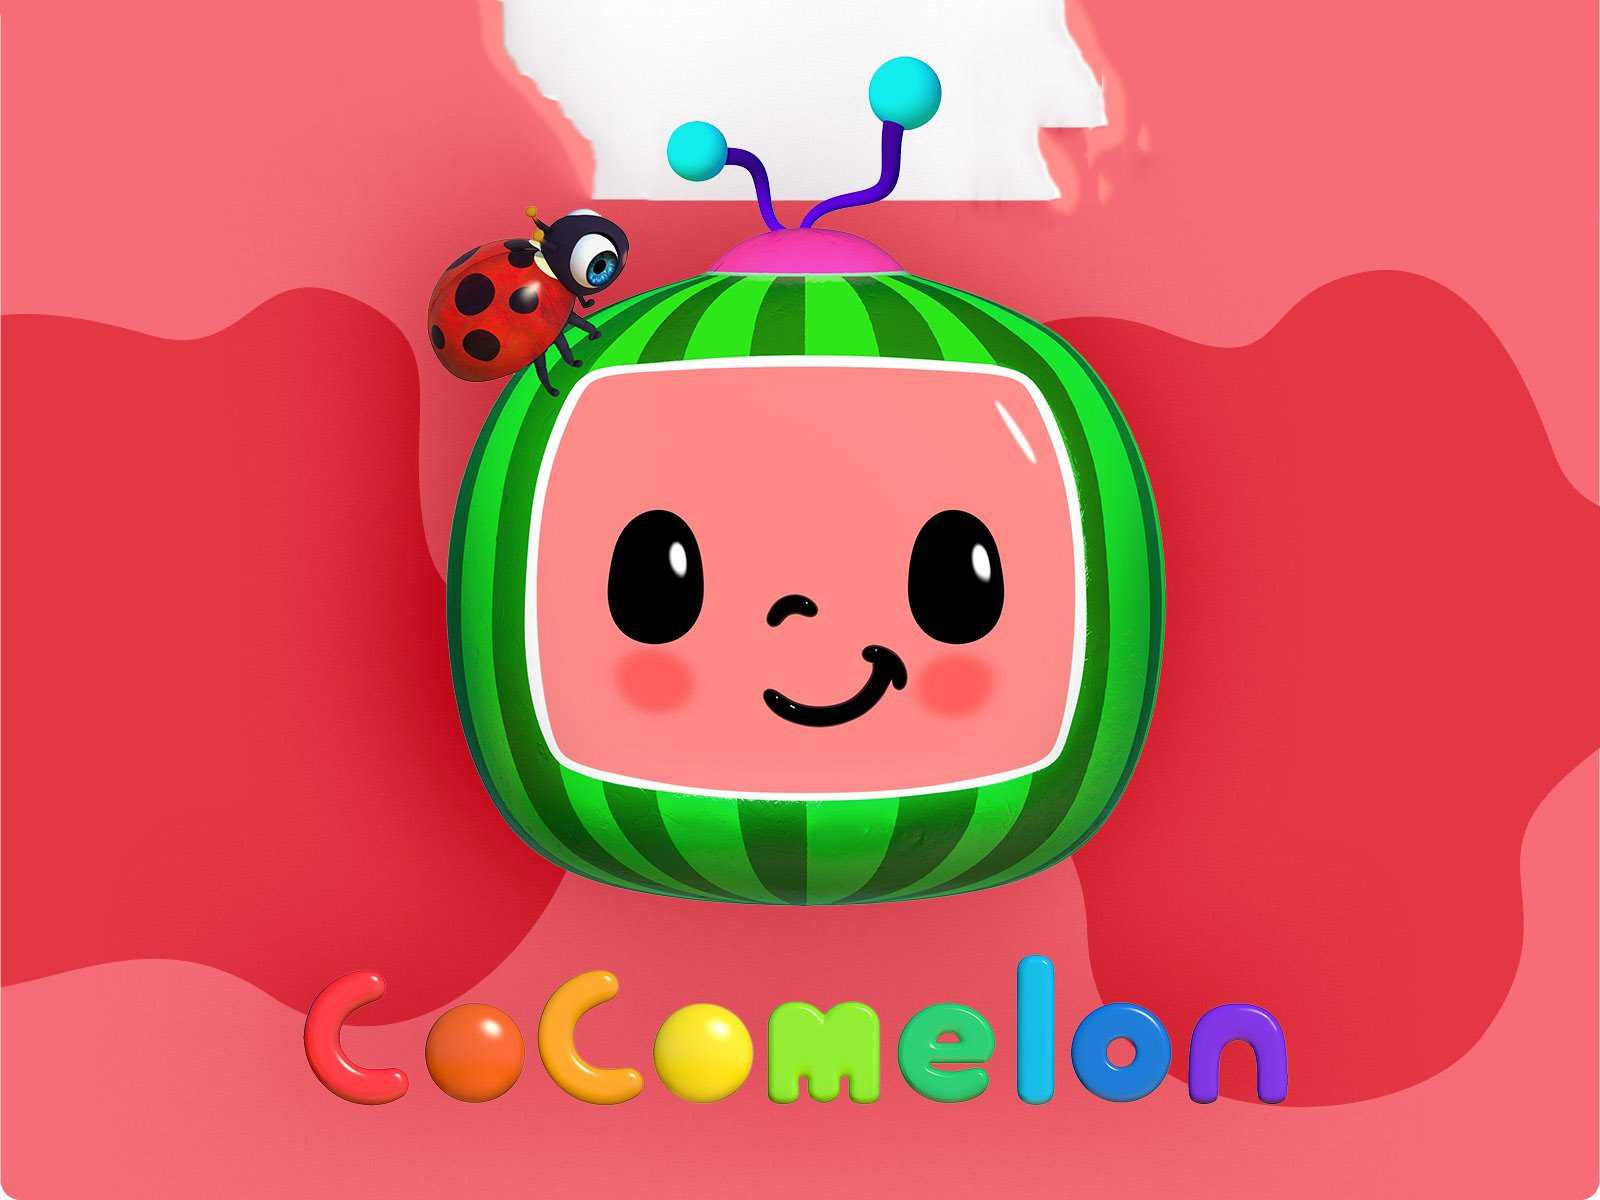 NOW STREAMING!! From the creators of CoComelon comes a brand new bilin... |  TikTok